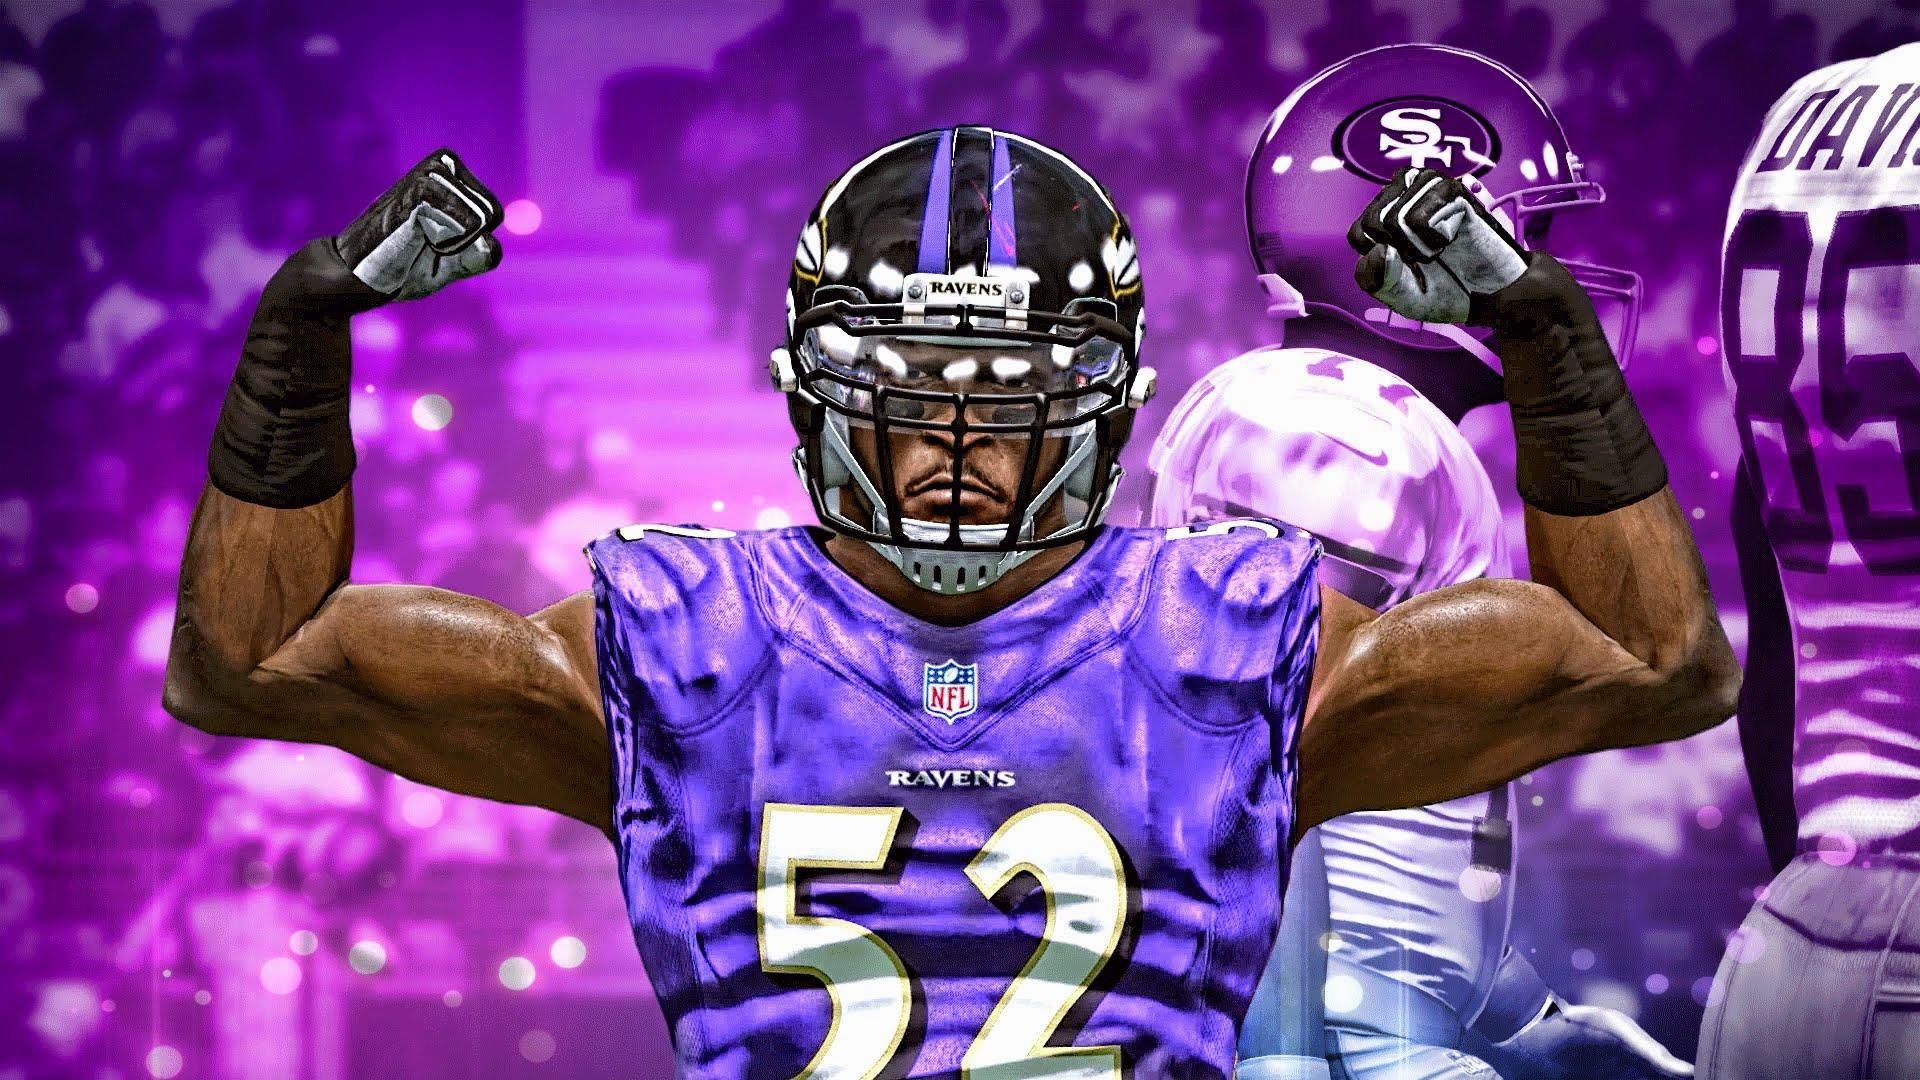 Ray Lewis Wallpaper HD for Desktop and Mobile iPhoneLovely 2048